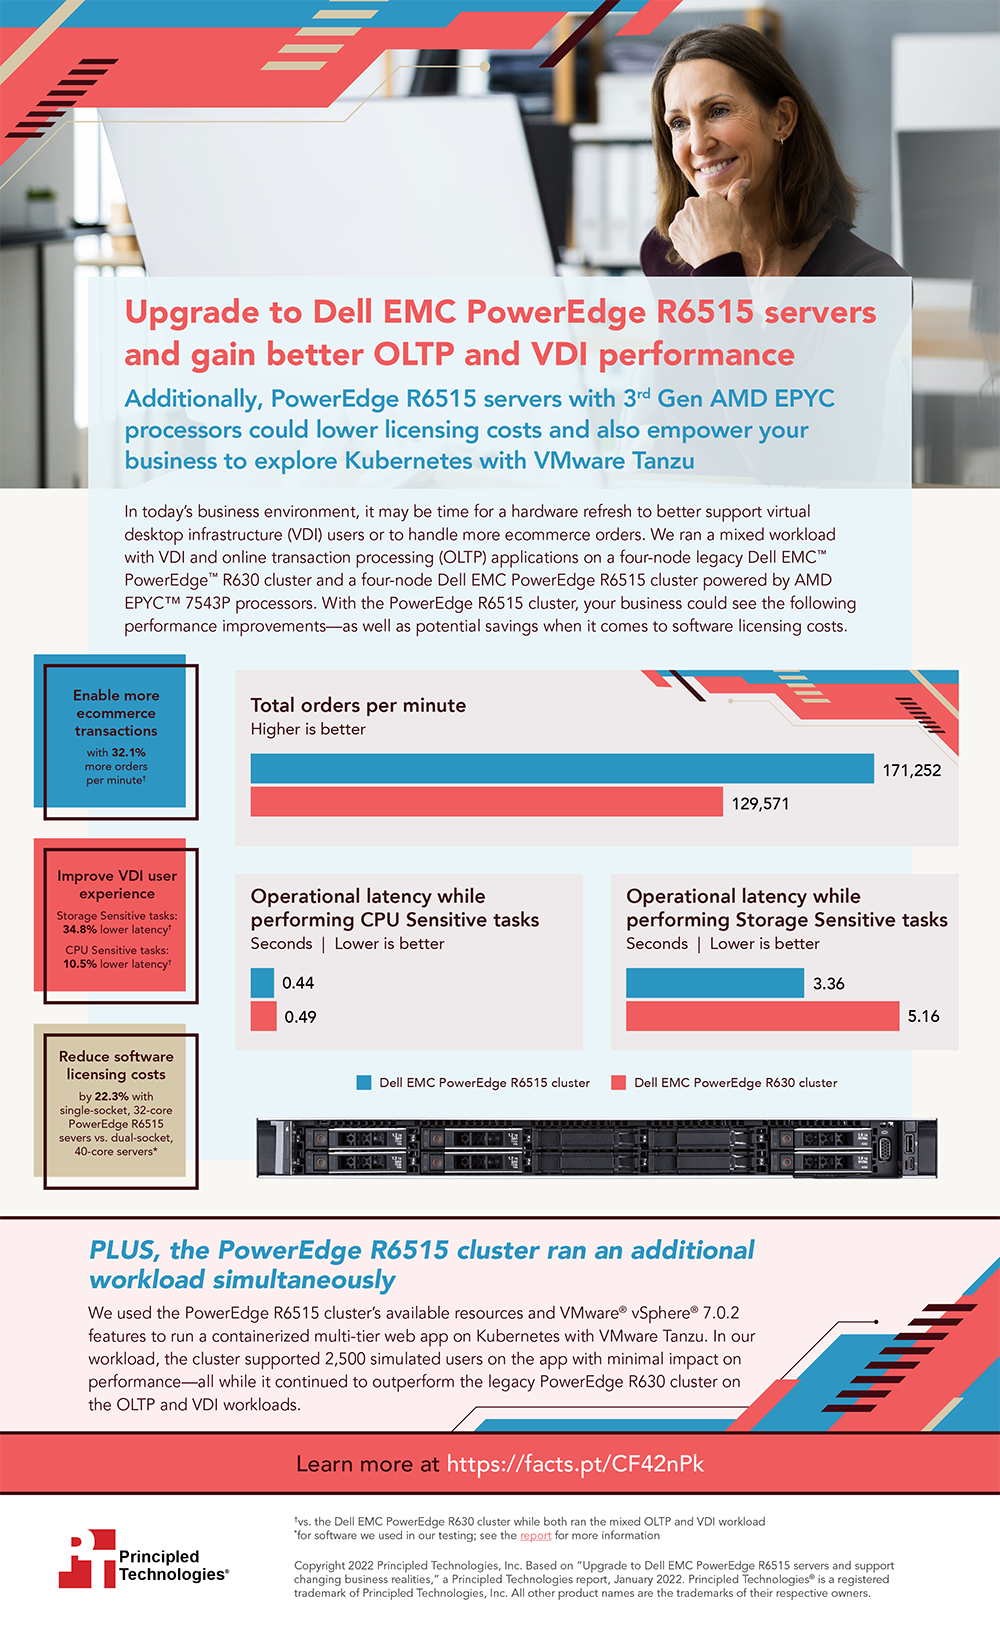  Upgrade to Dell EMC PowerEdge R6515 servers and gain better OLTP and VDI performance - Infographic